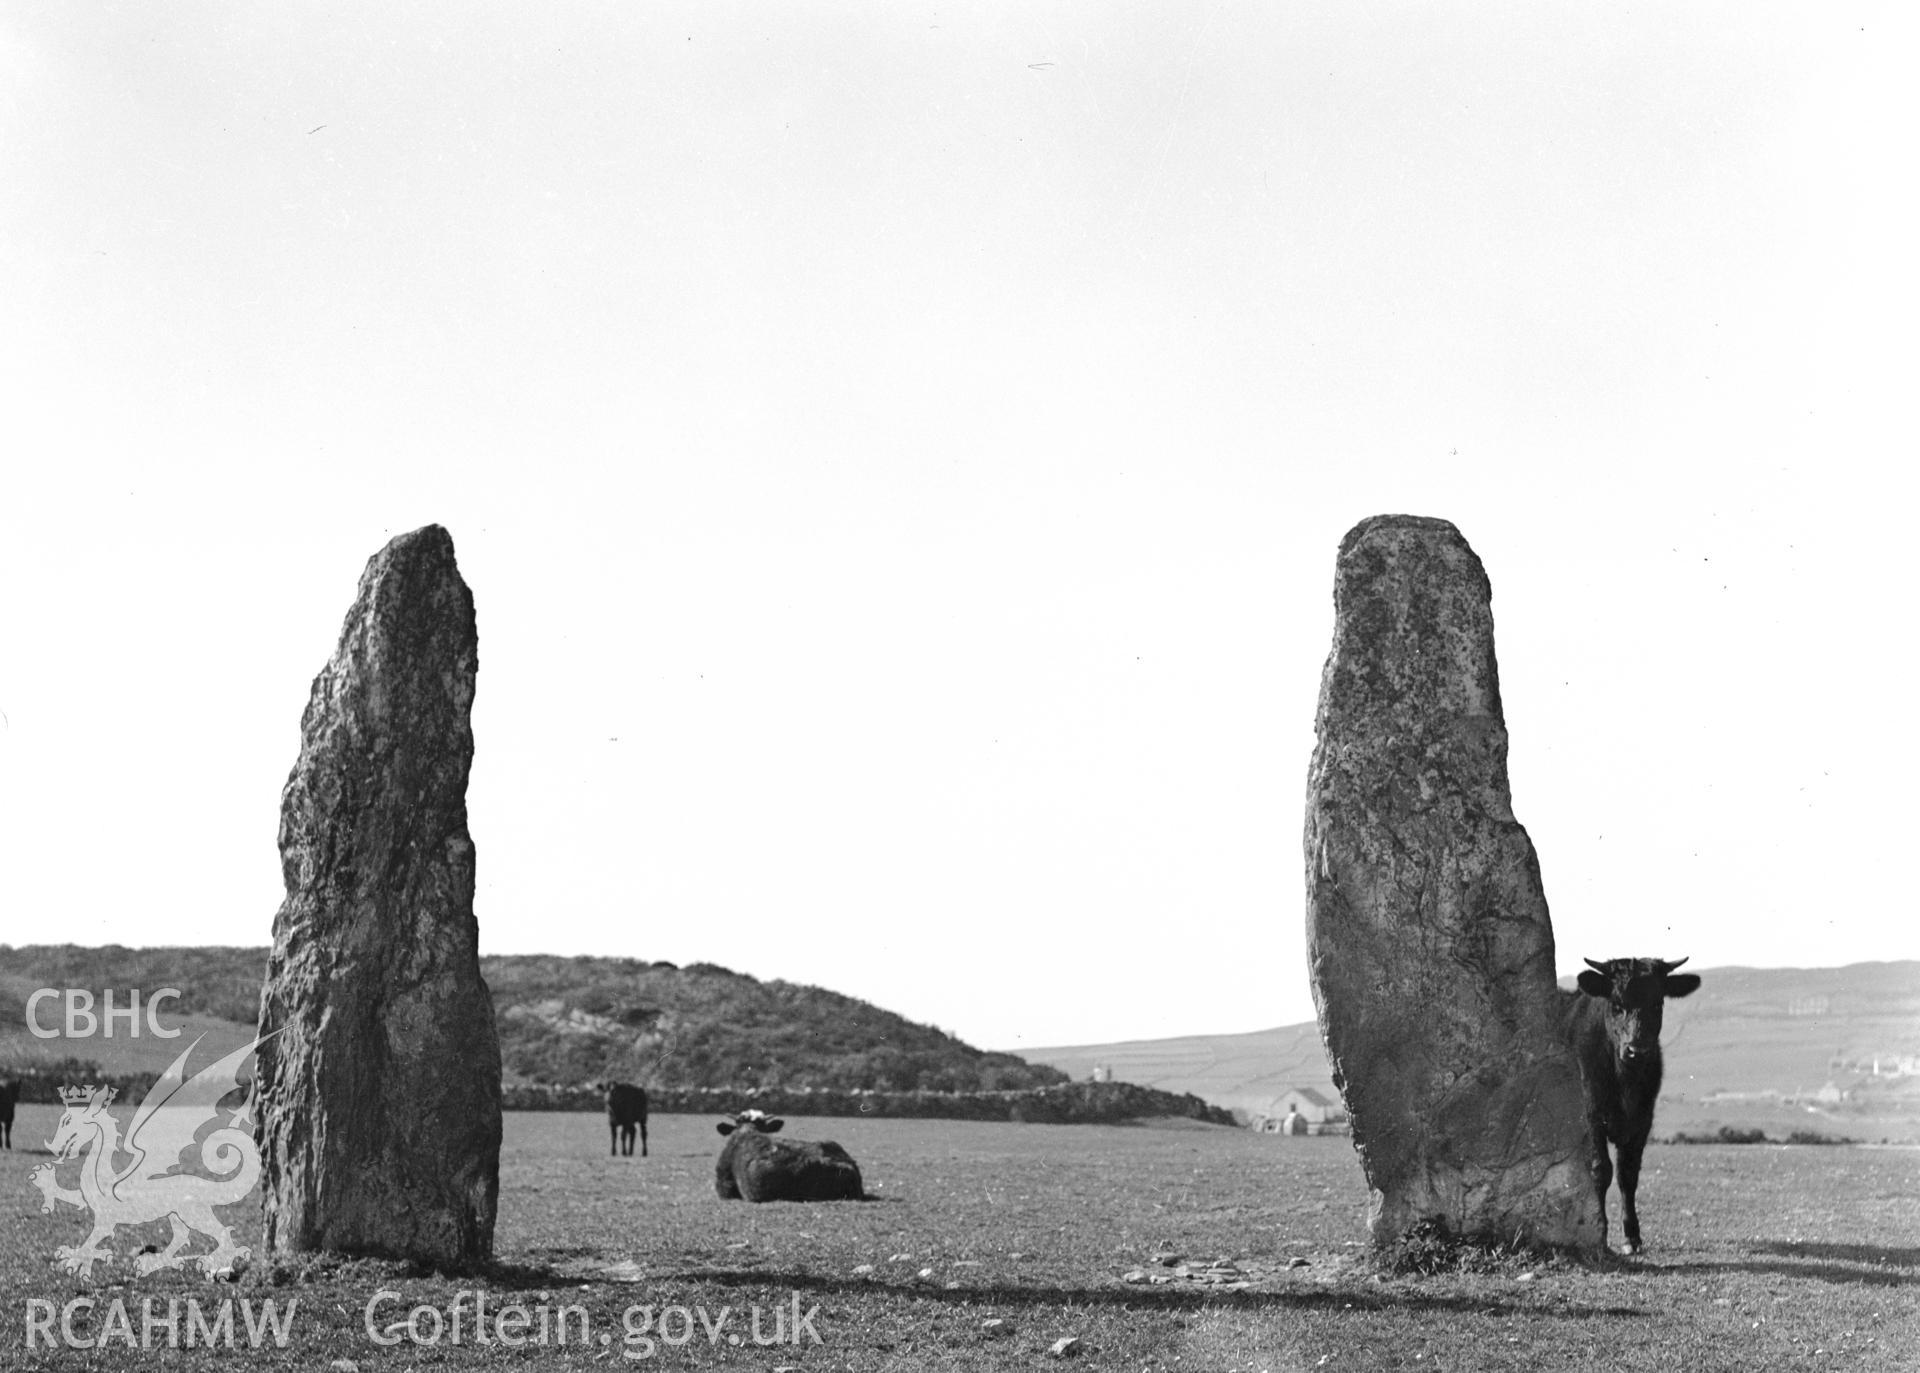 General view of stones with cattle.